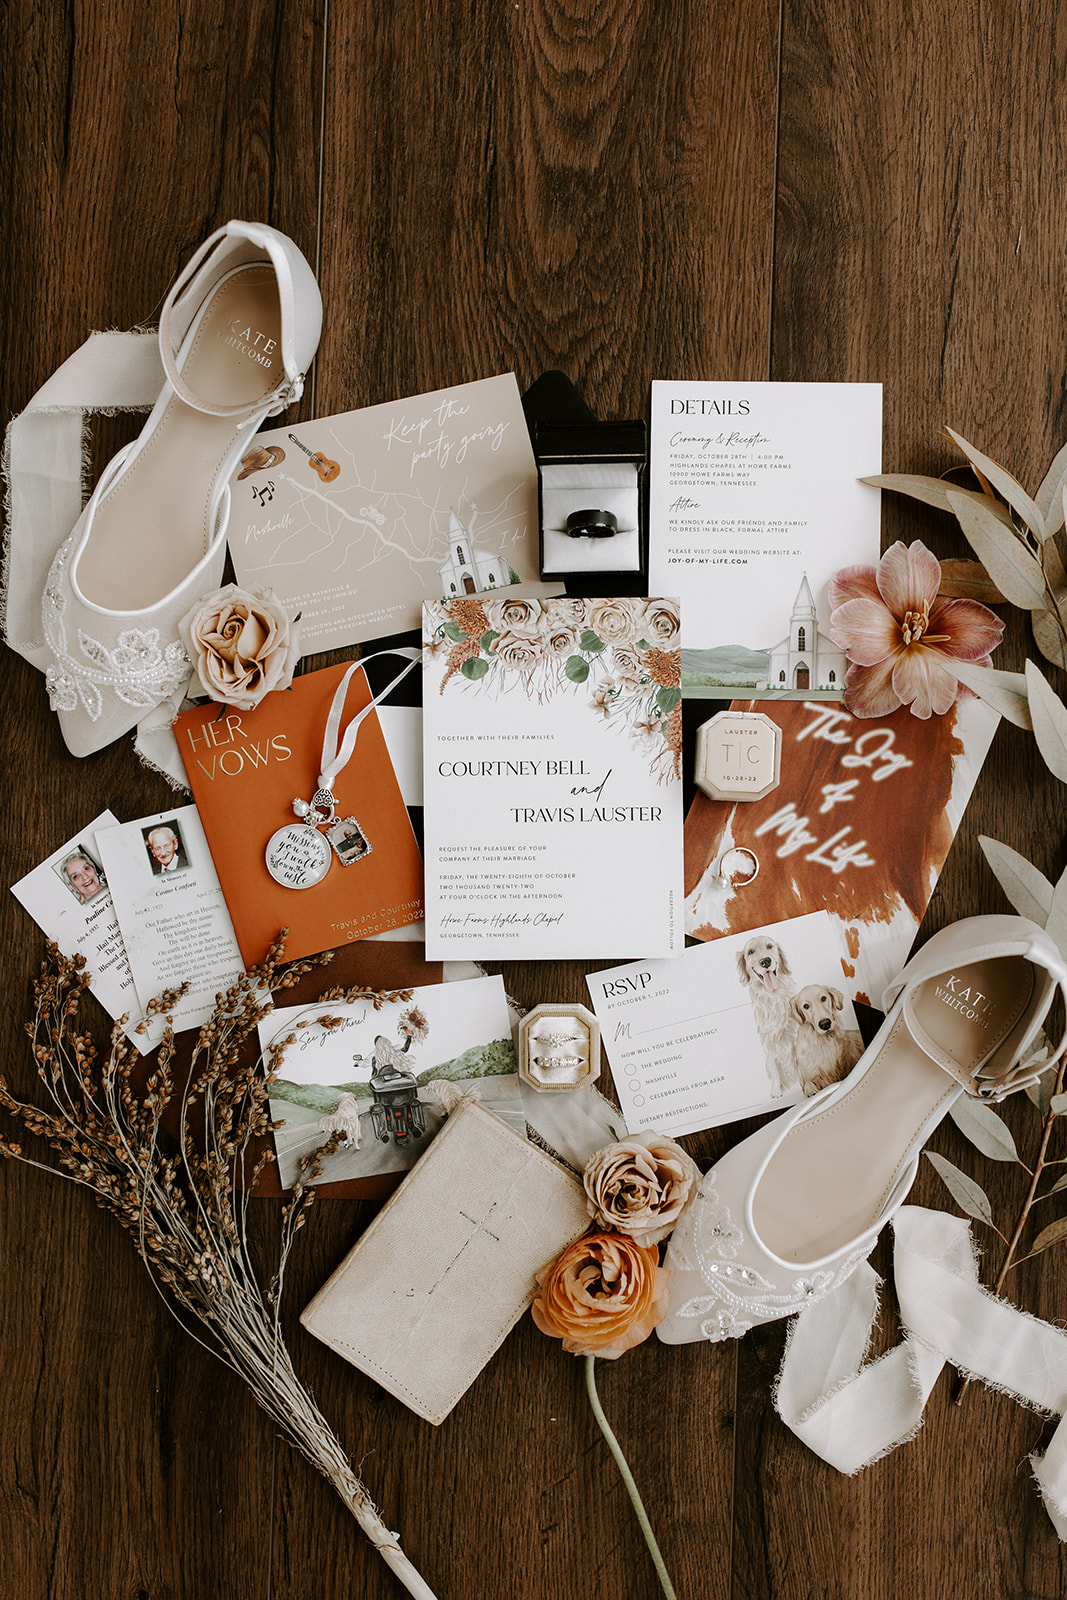 Chapel Destination Wedding in Tennessee with Thoughtful Details